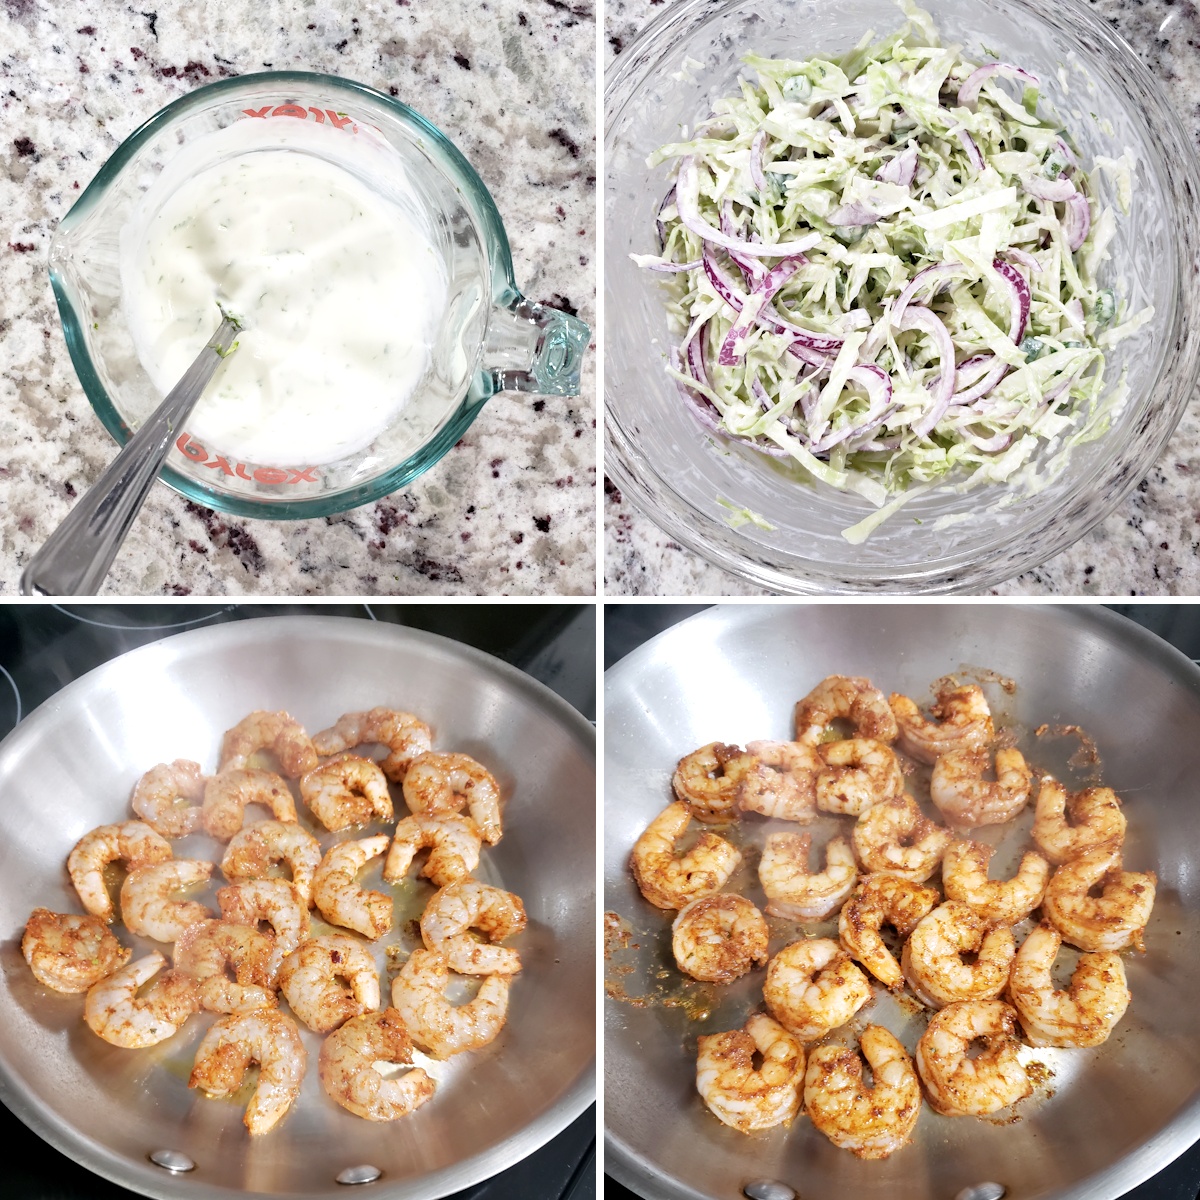 Mixing slaw in a bowl and cooking shrimp in a skillet.